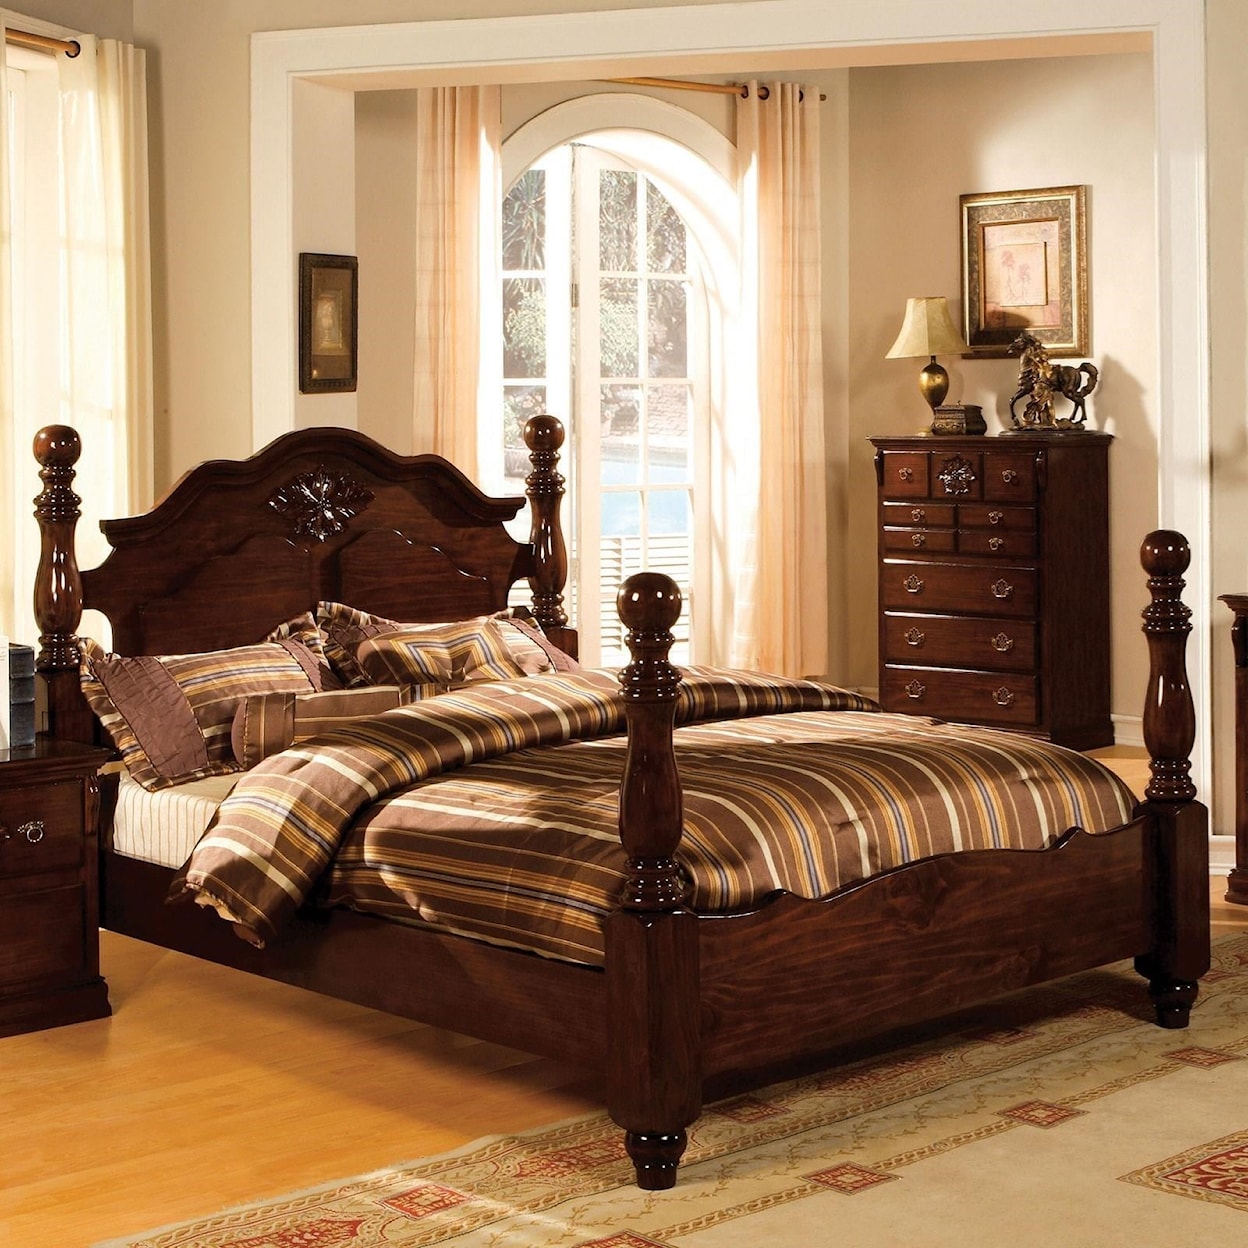 Furniture of America Tuscan Queen Bed